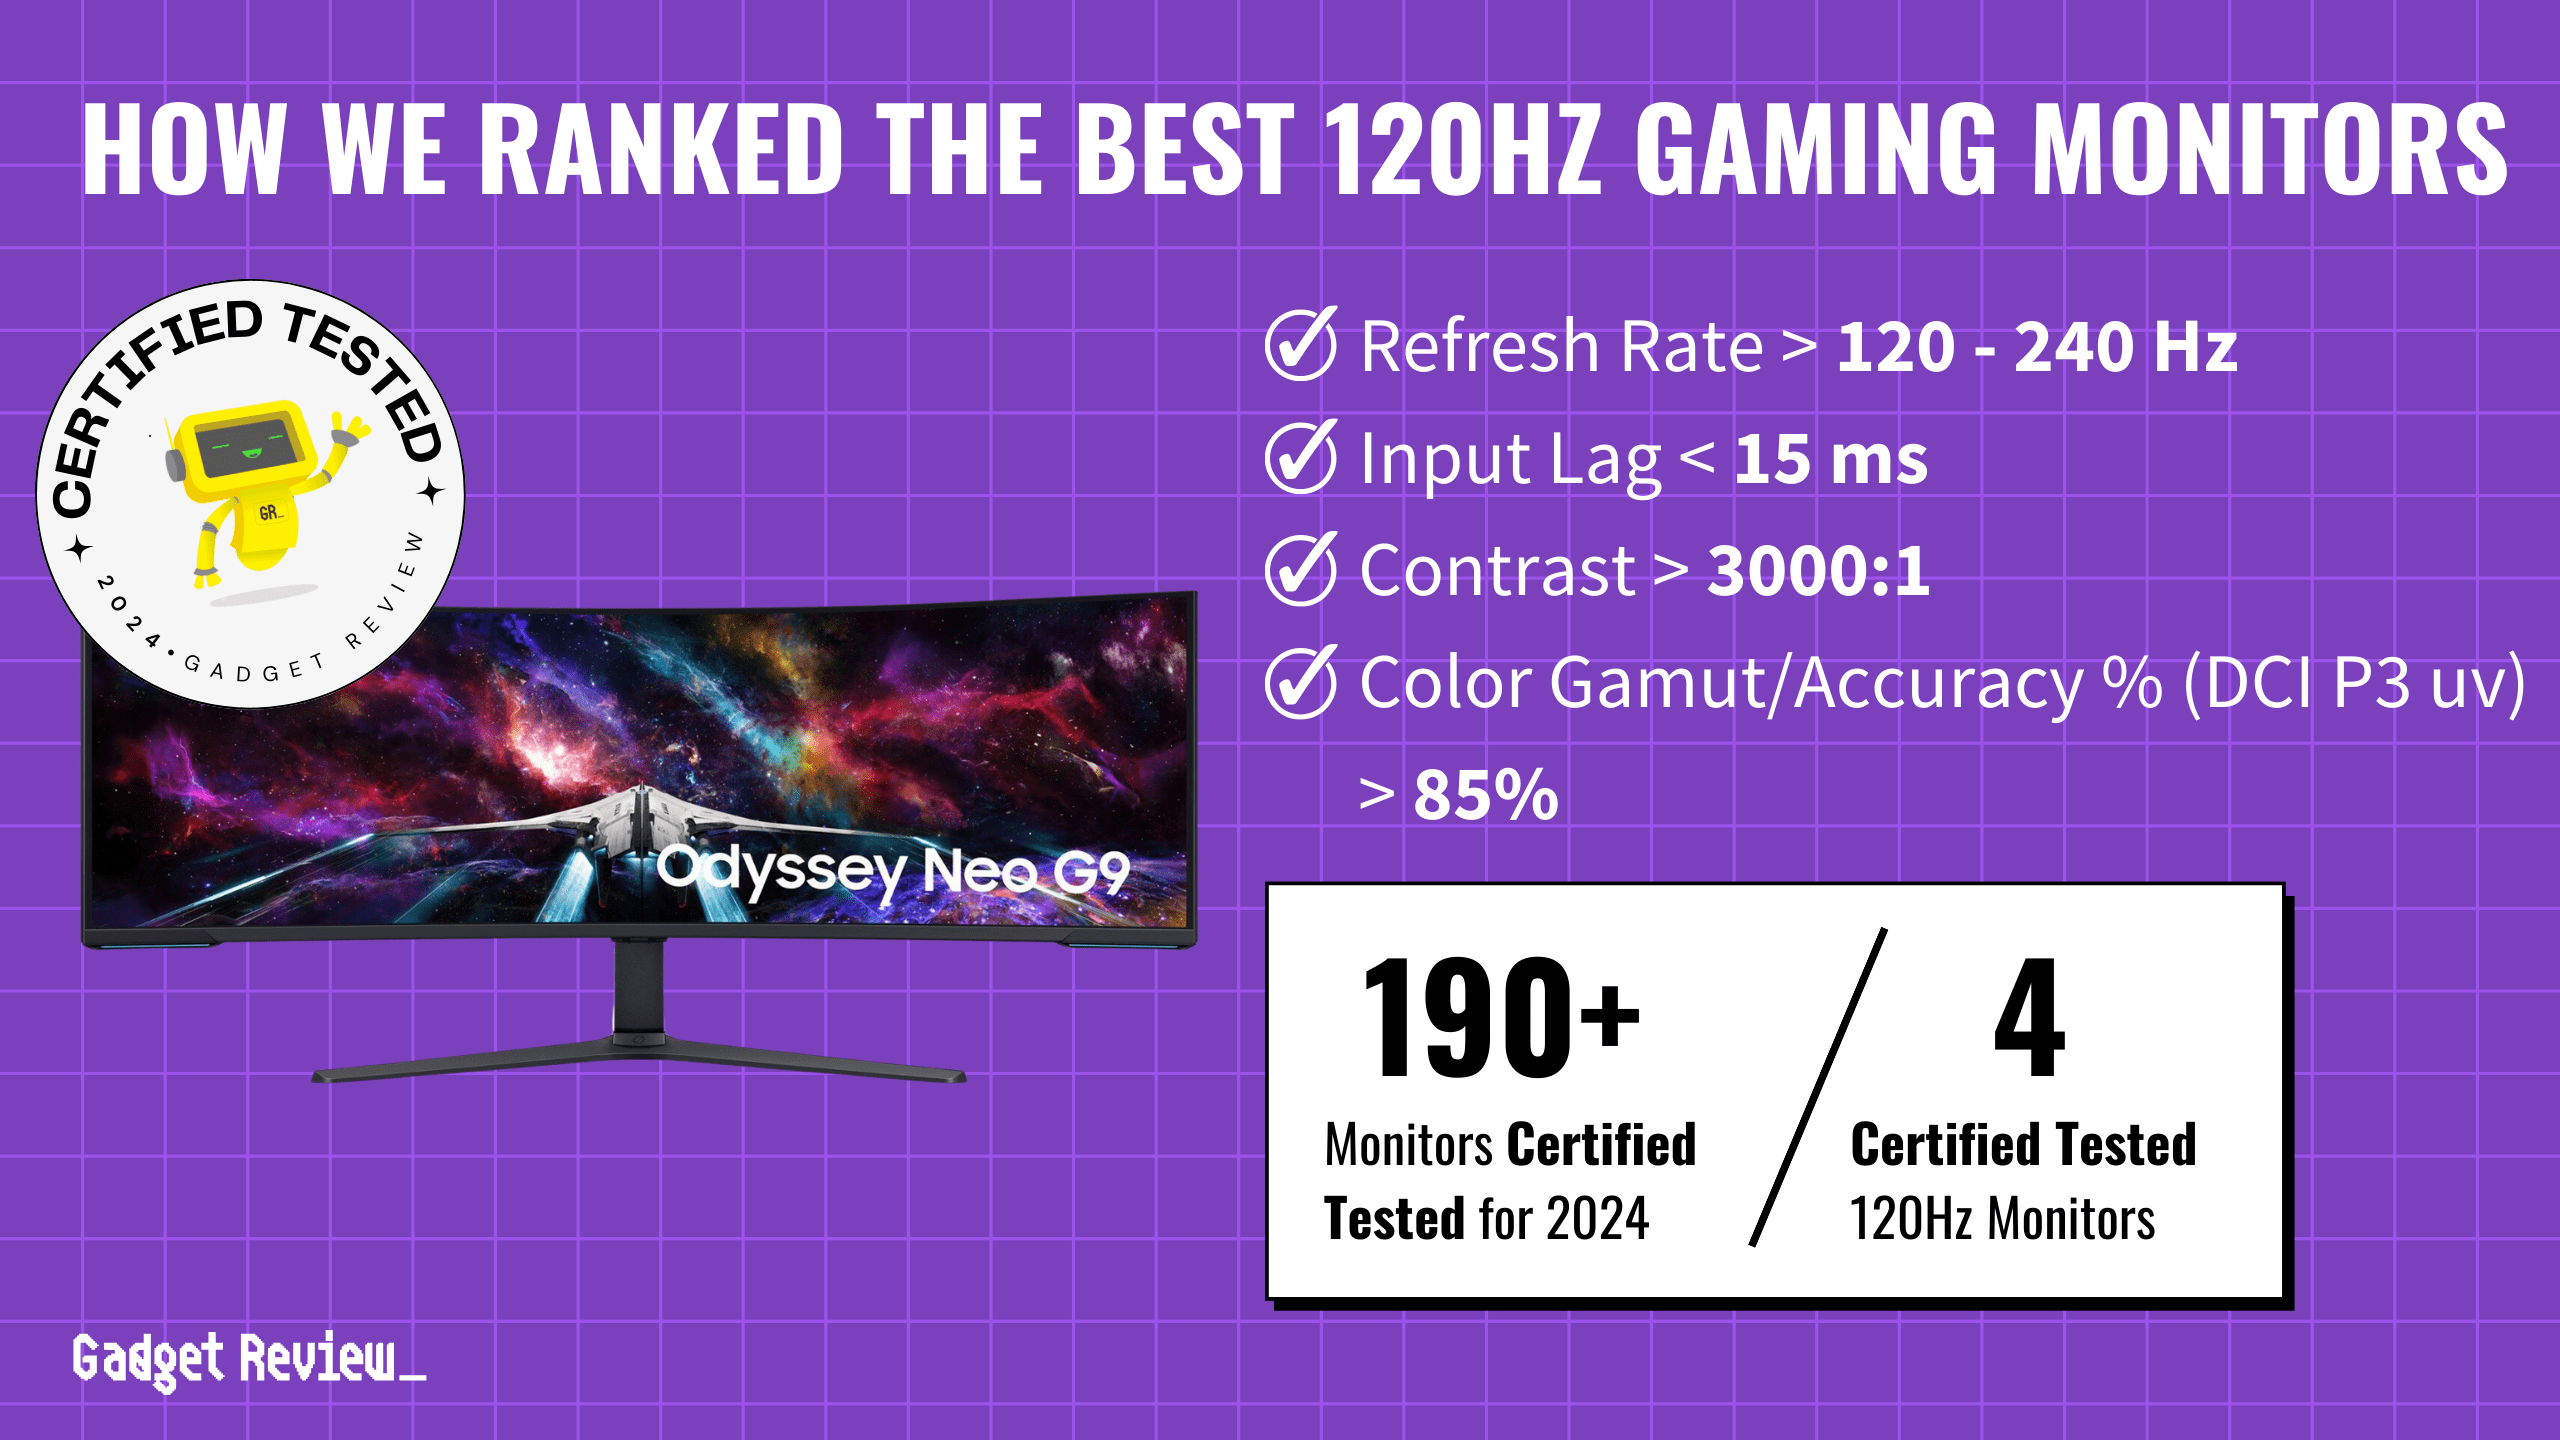 What Are The 4 Top 120Hz Gaming Monitors?